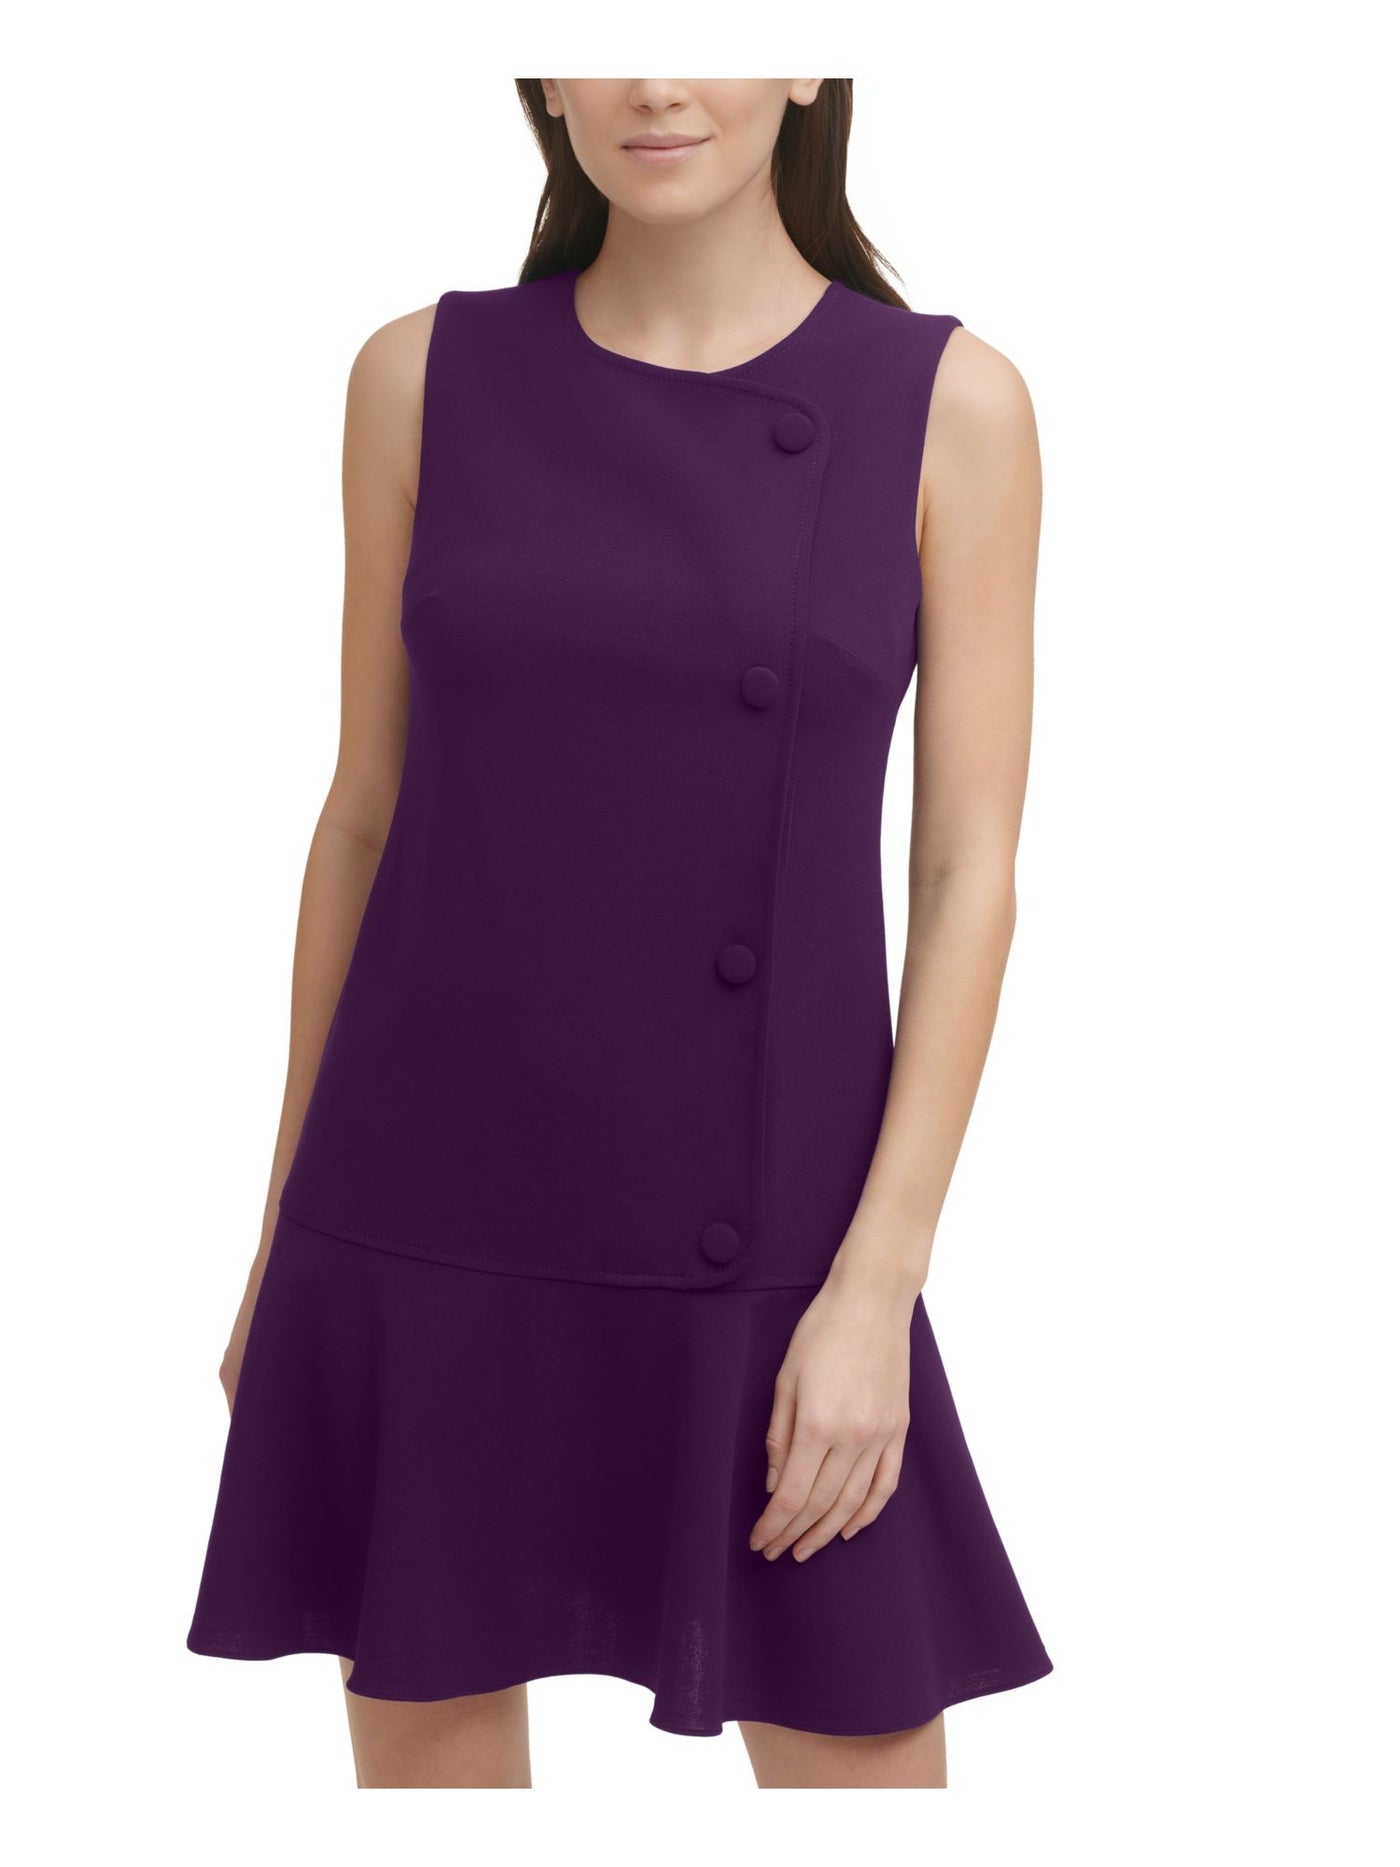 DKNY Womens Purple Stretch Zippered Fitted Faux Button Darted Sleeveless Round Neck Short Wear To Work Drop Waist Dress 6